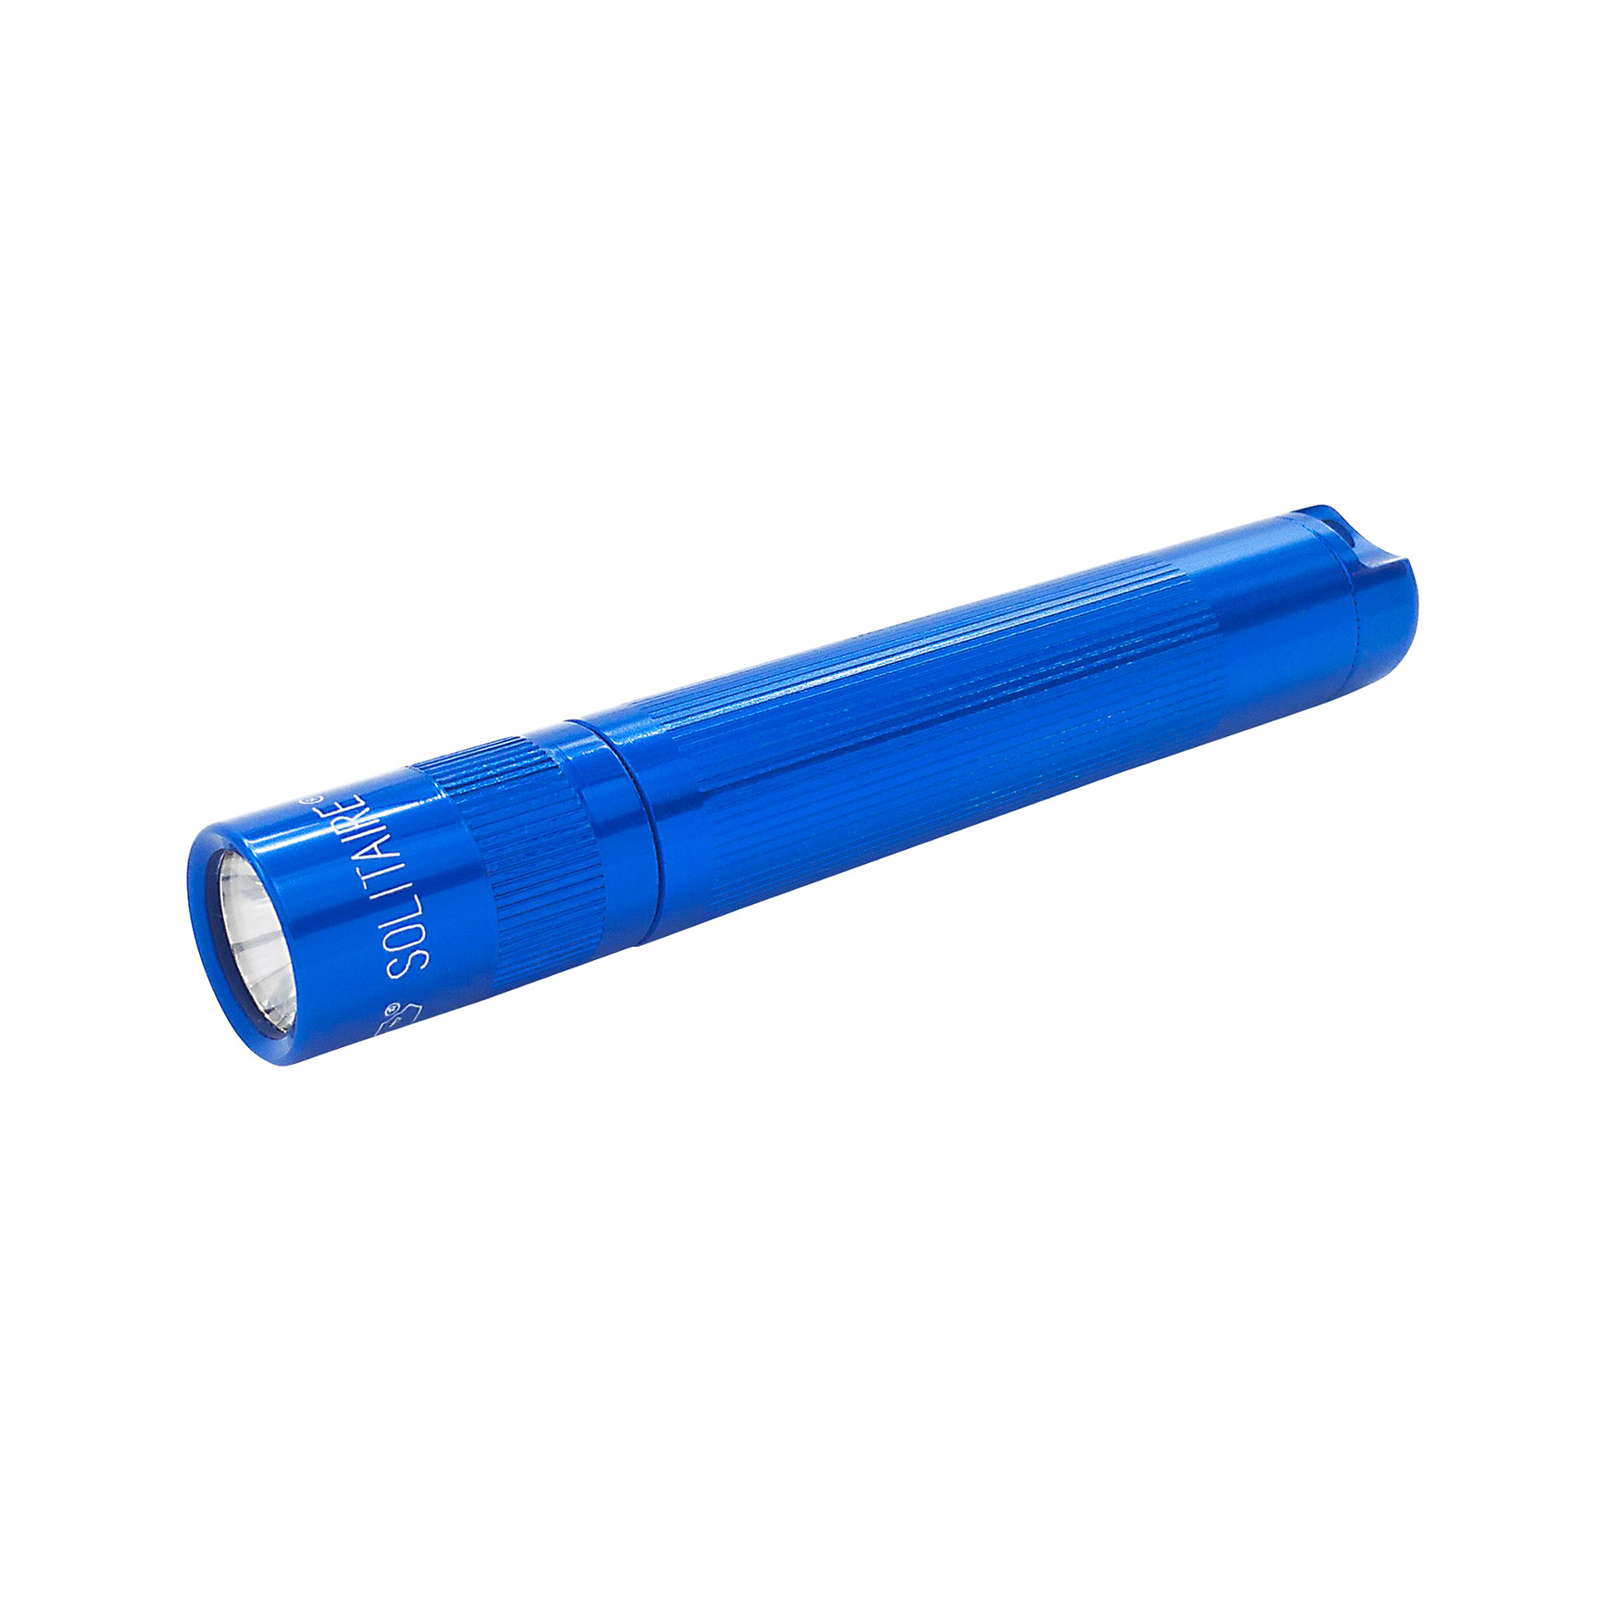 Maglite zaklamp Solitaire 1 Cell AAA, box, blauw